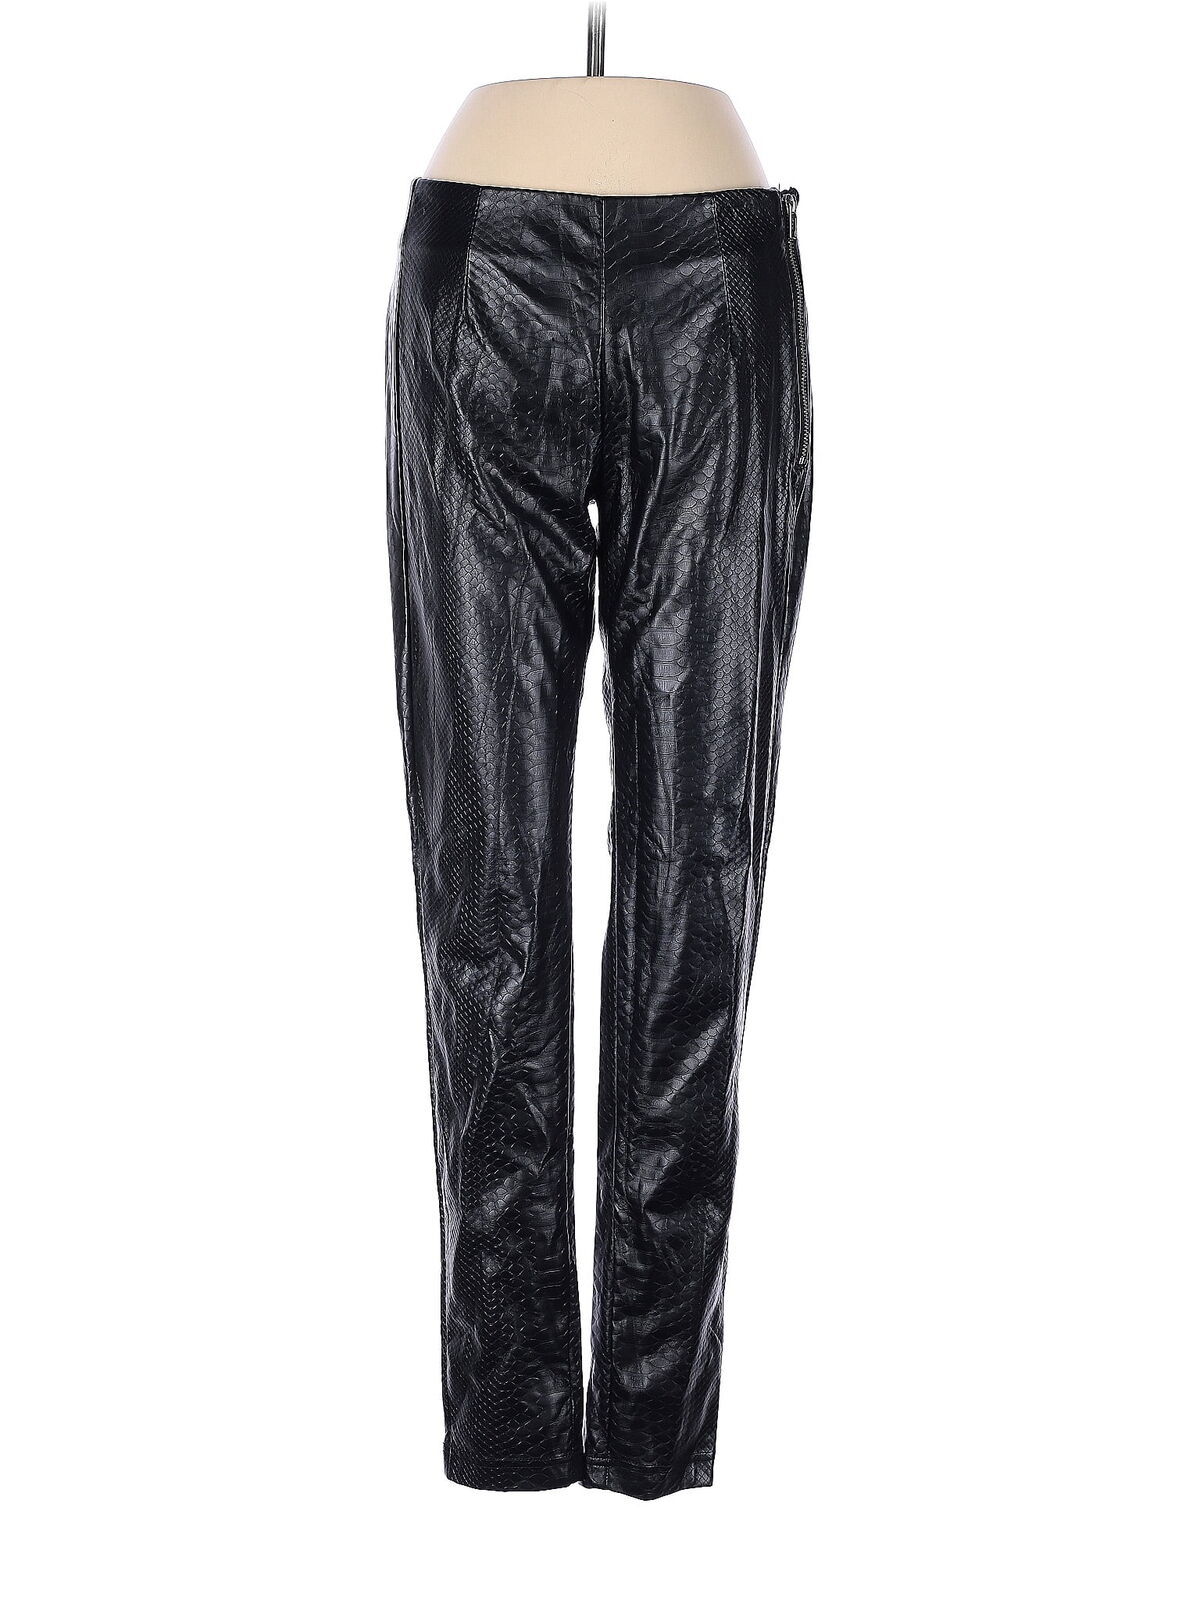 French Connection Women Black Faux Leather Pants 2 - image 1